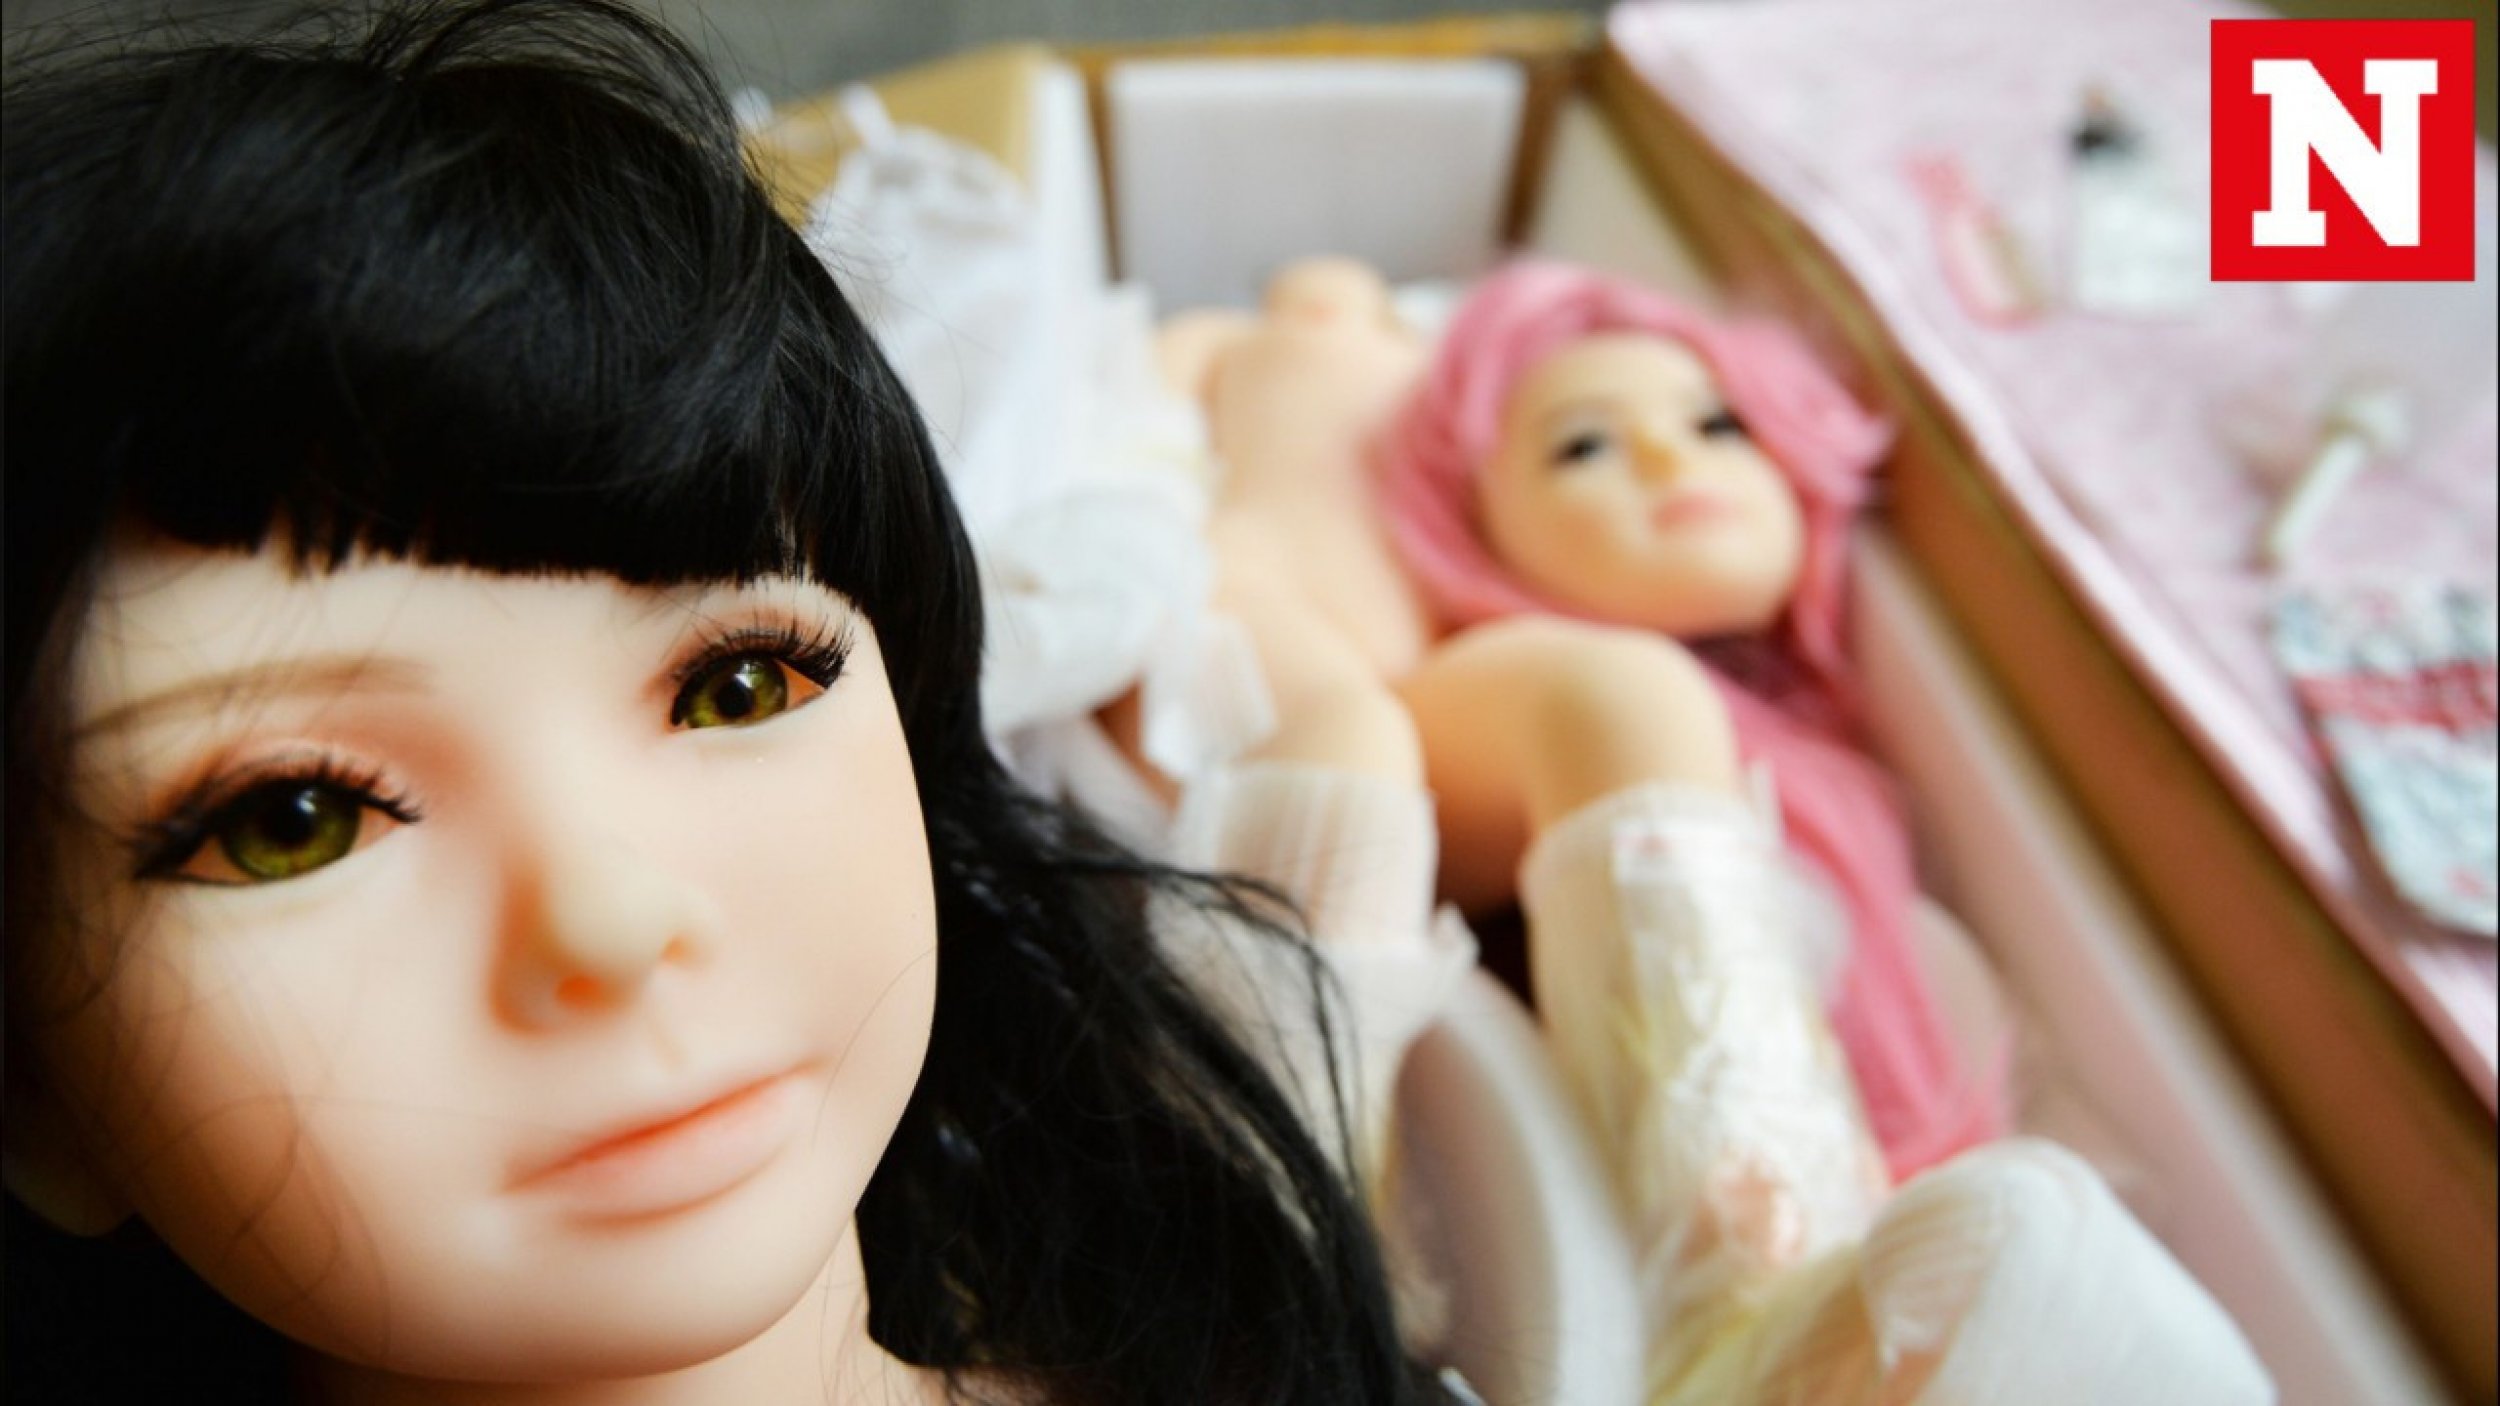 South Korean Citizens Can Now Import Life-Size Sex Dolls